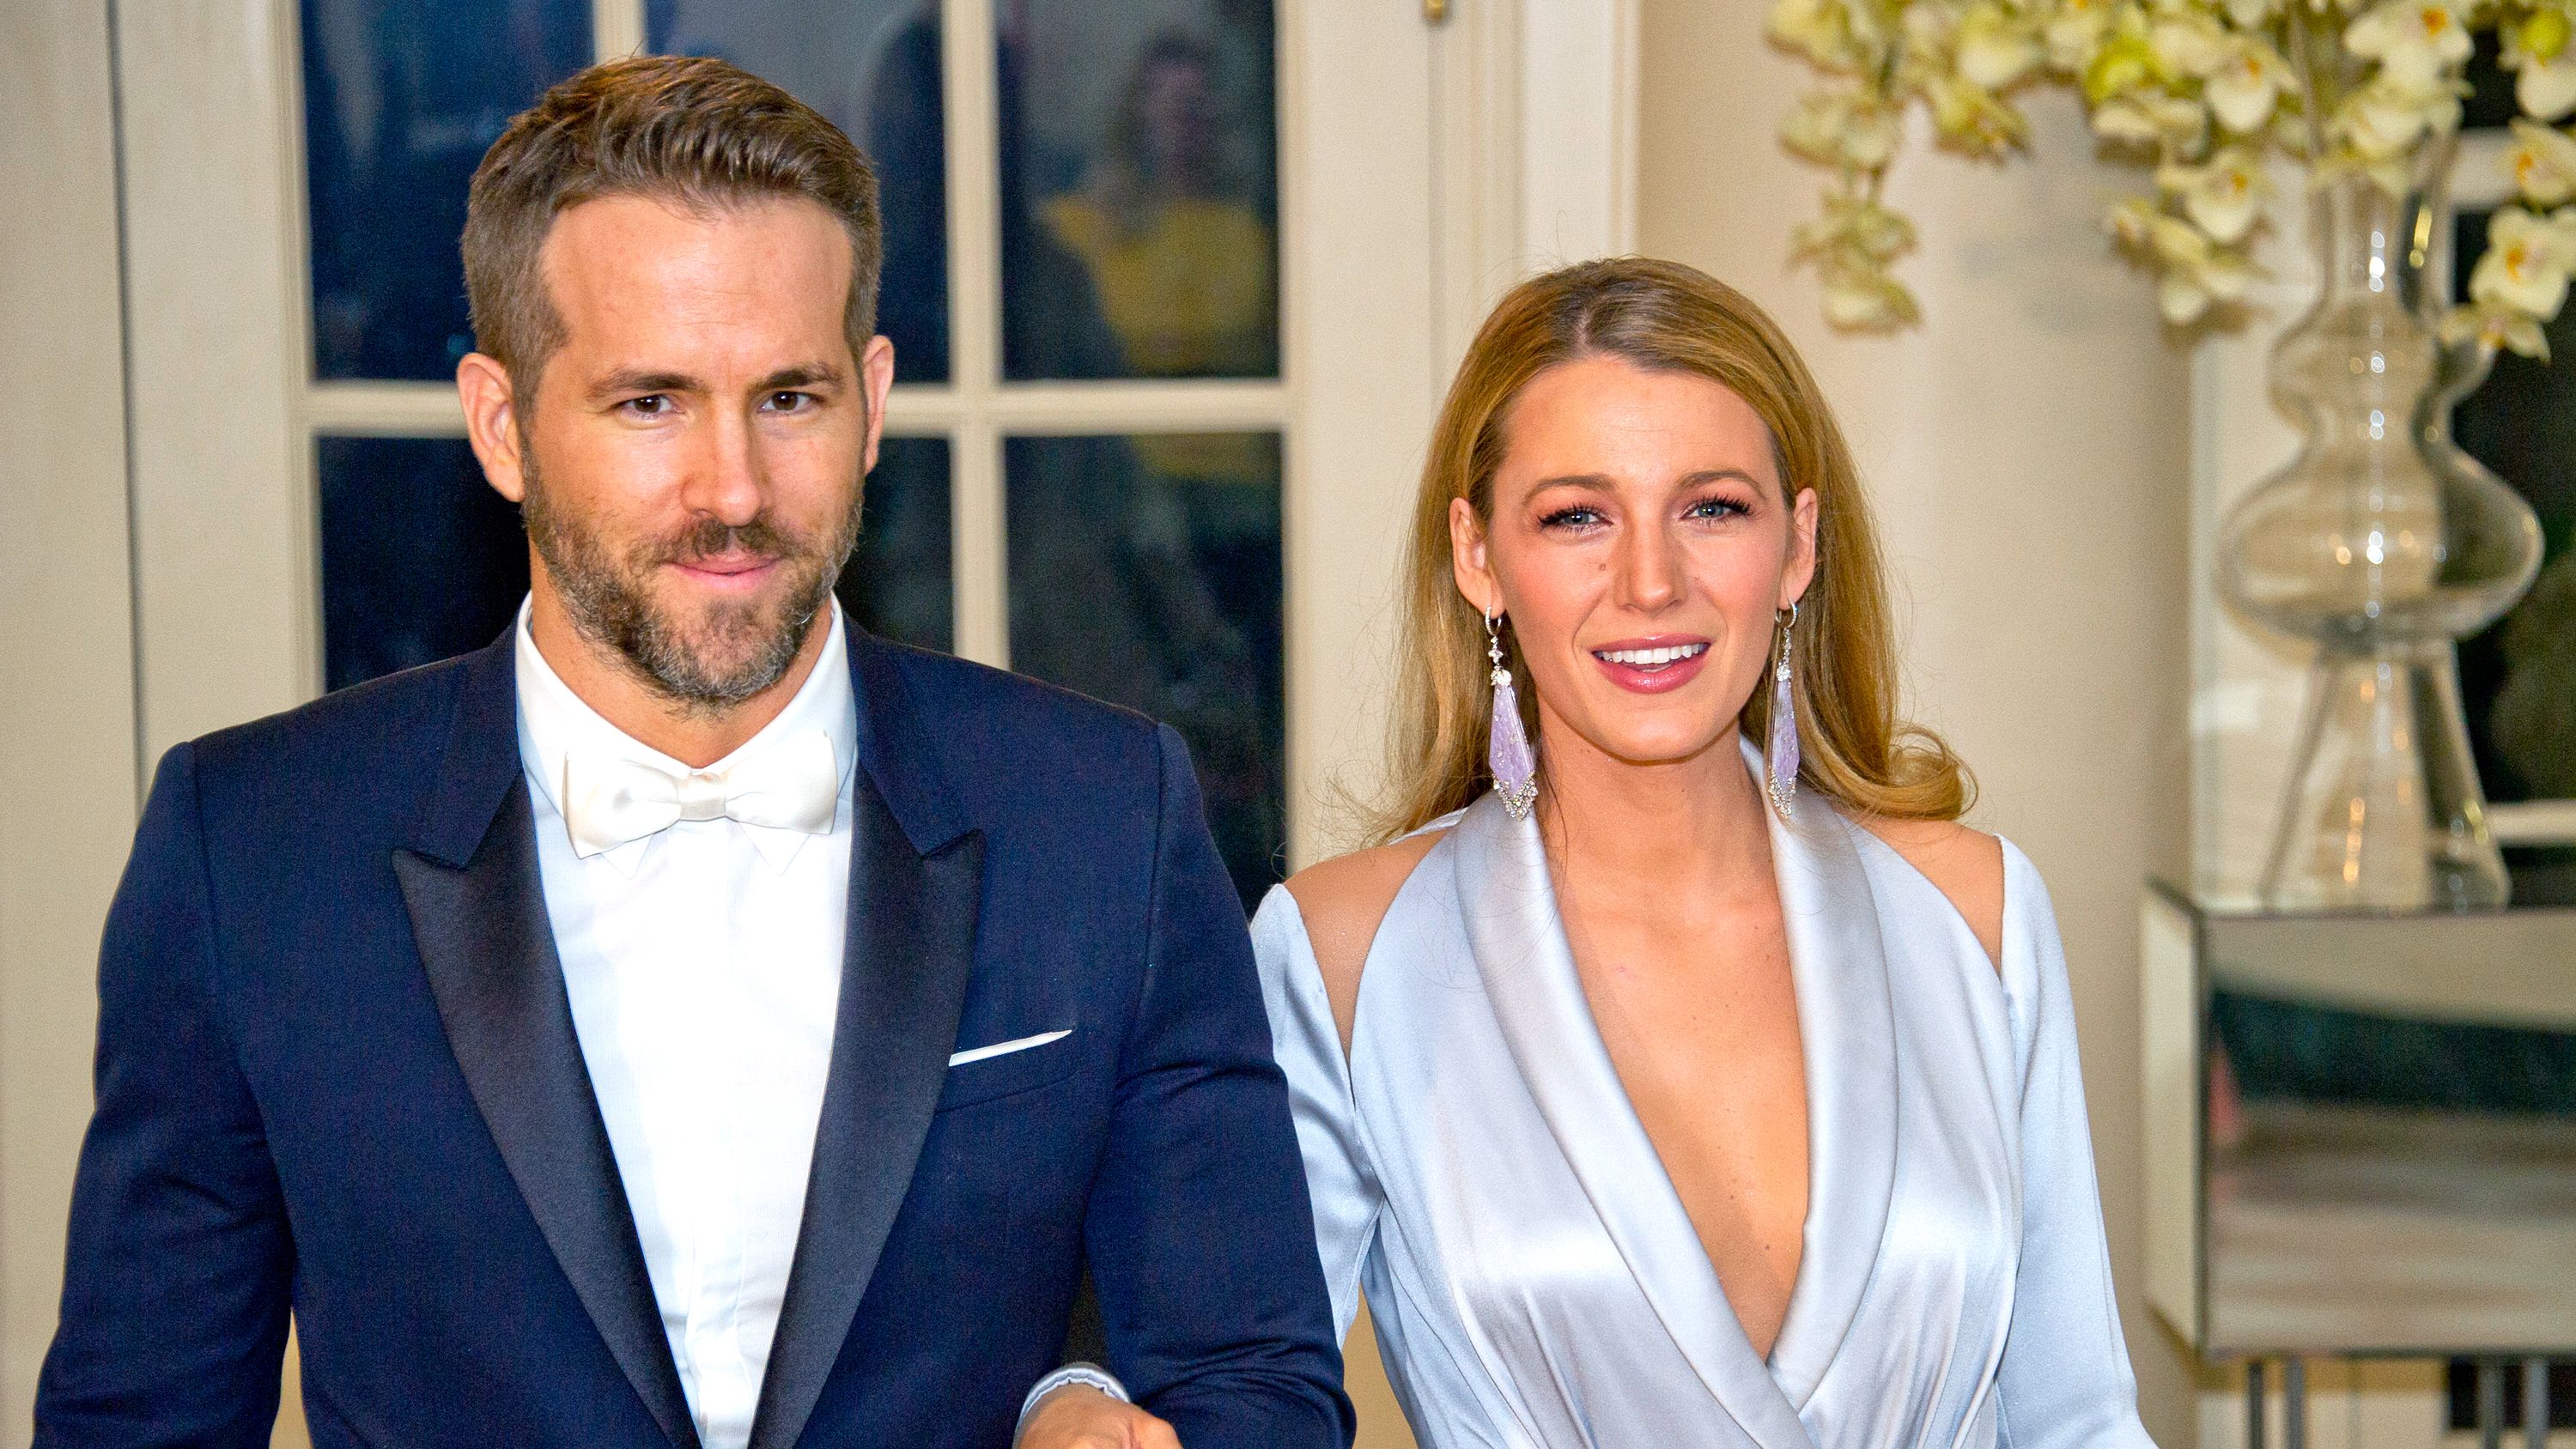 https://hips.hearstapps.com/hmg-prod/images/blake-lively-ryan-reynolds-gettyimages-514691500-1596556005.jpg?crop=1xw:0.7952403393025448xh;center,top